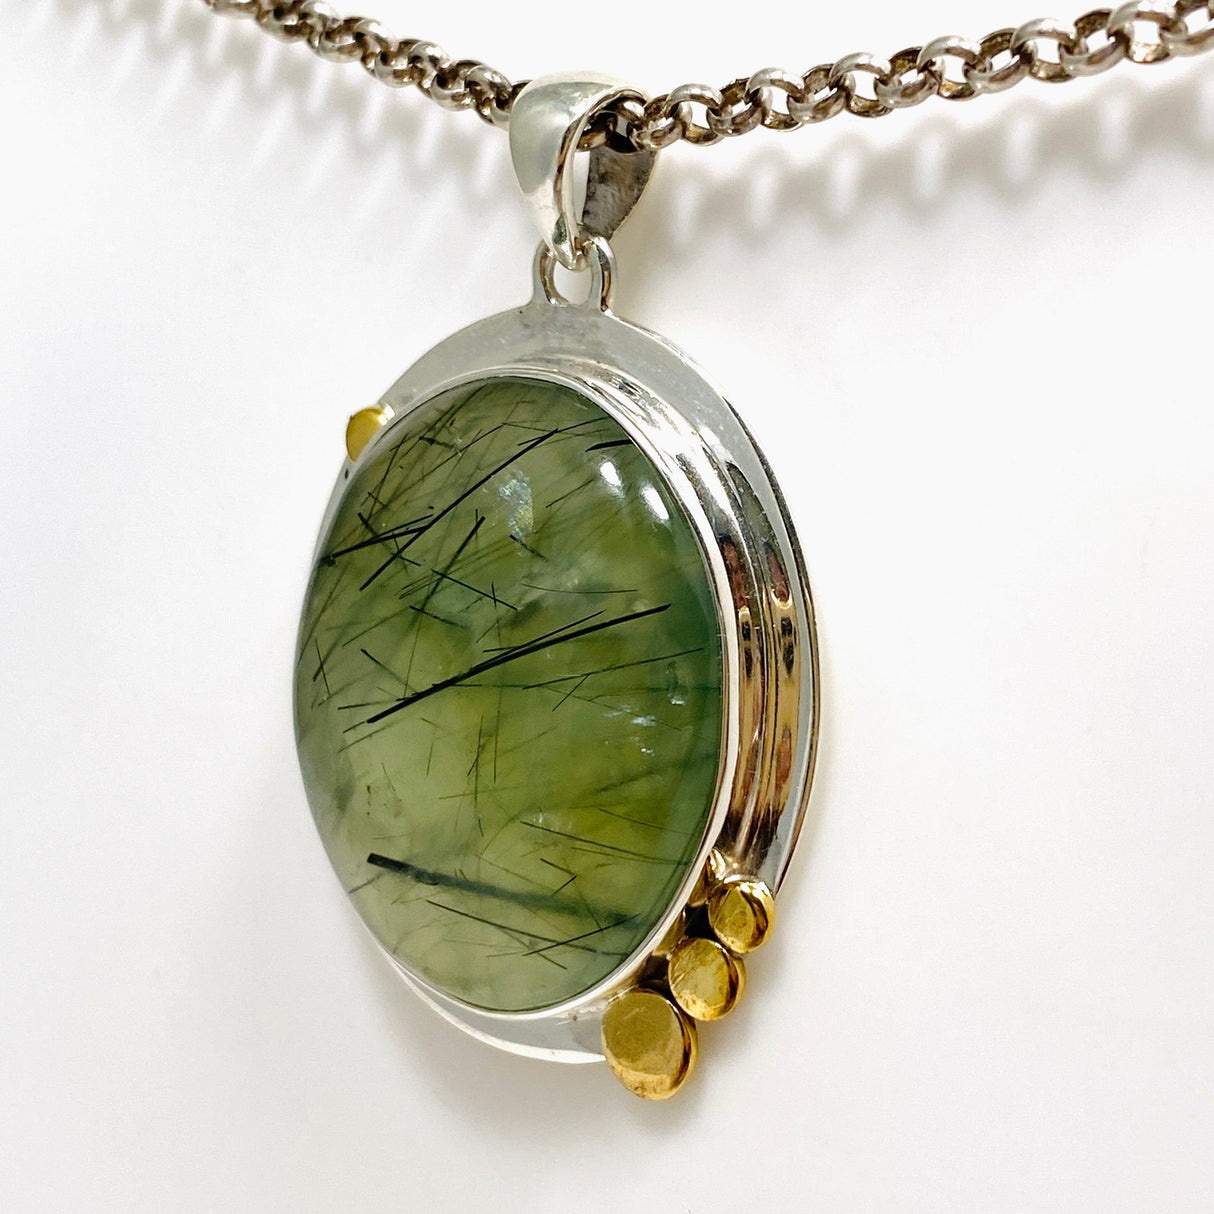 Prehnite and Epidote Oval Pendant with Brass Accents KPGJ4289 - Nature's Magick